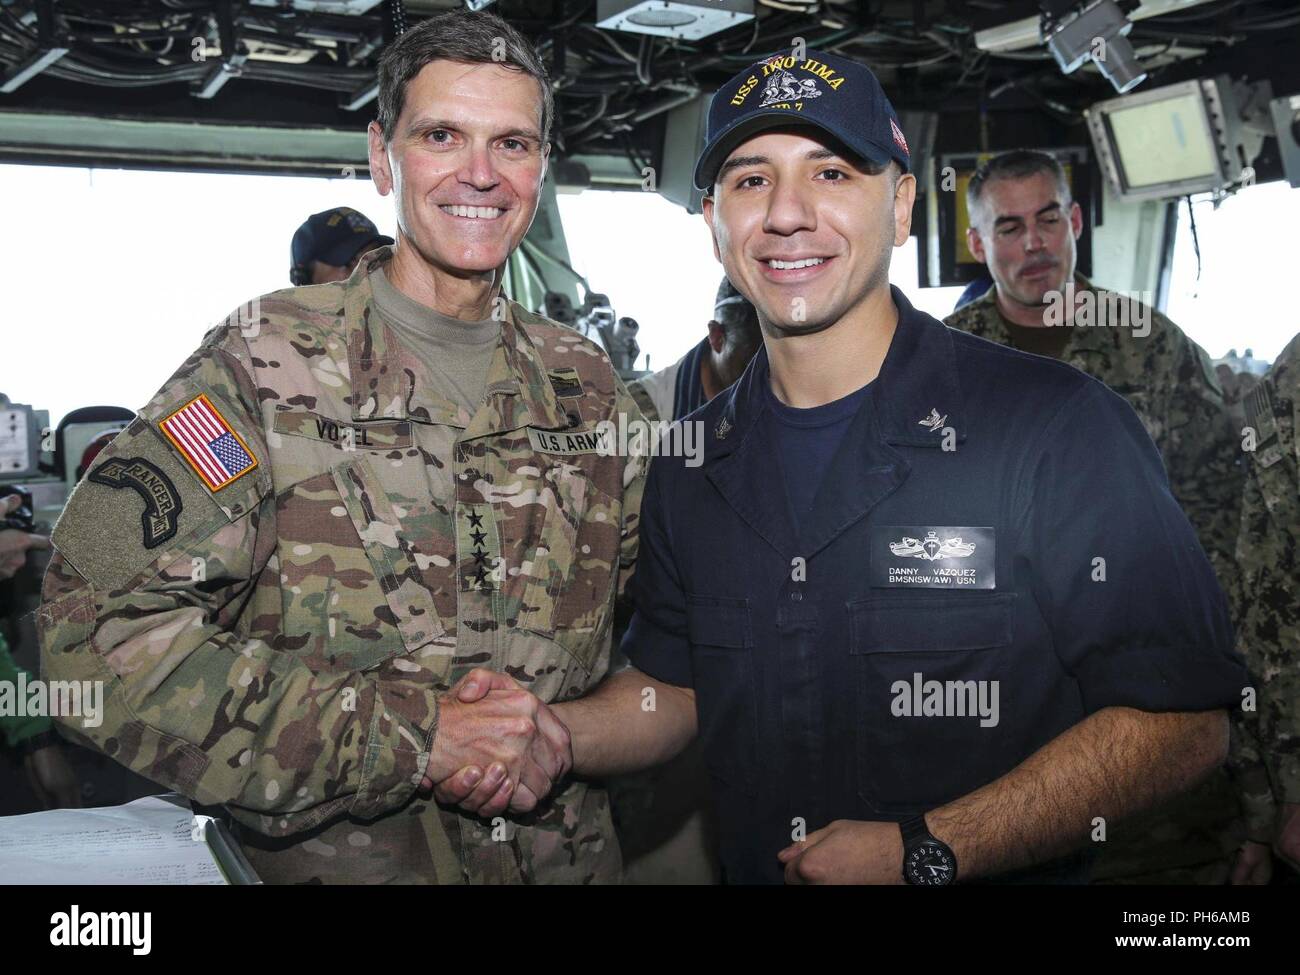 ARABIAN GULF (June 22, 2018) U.S. Army Gen. Joseph Votel, commander, U.S. Central Command, poses for a picture with U.S. Navy Boatswain’s Mate 3rd Class Danny Vazquez  aboard the Wasp-class amphibious assault ship USS Iwo Jima (LHD 7), June 22, 2018. Votel, Vice Adm. Scott Stearney, commander, U.S. Naval Forces Central Command, and other distinguished visitors took a tour of Iwo Jima and spoke with crew members and Marines with the 26th Marine Expeditionary Unit, who are currently deployed to the U.S. 5th Fleet of operations in support of maritime security operations to reassure allies and par Stock Photo